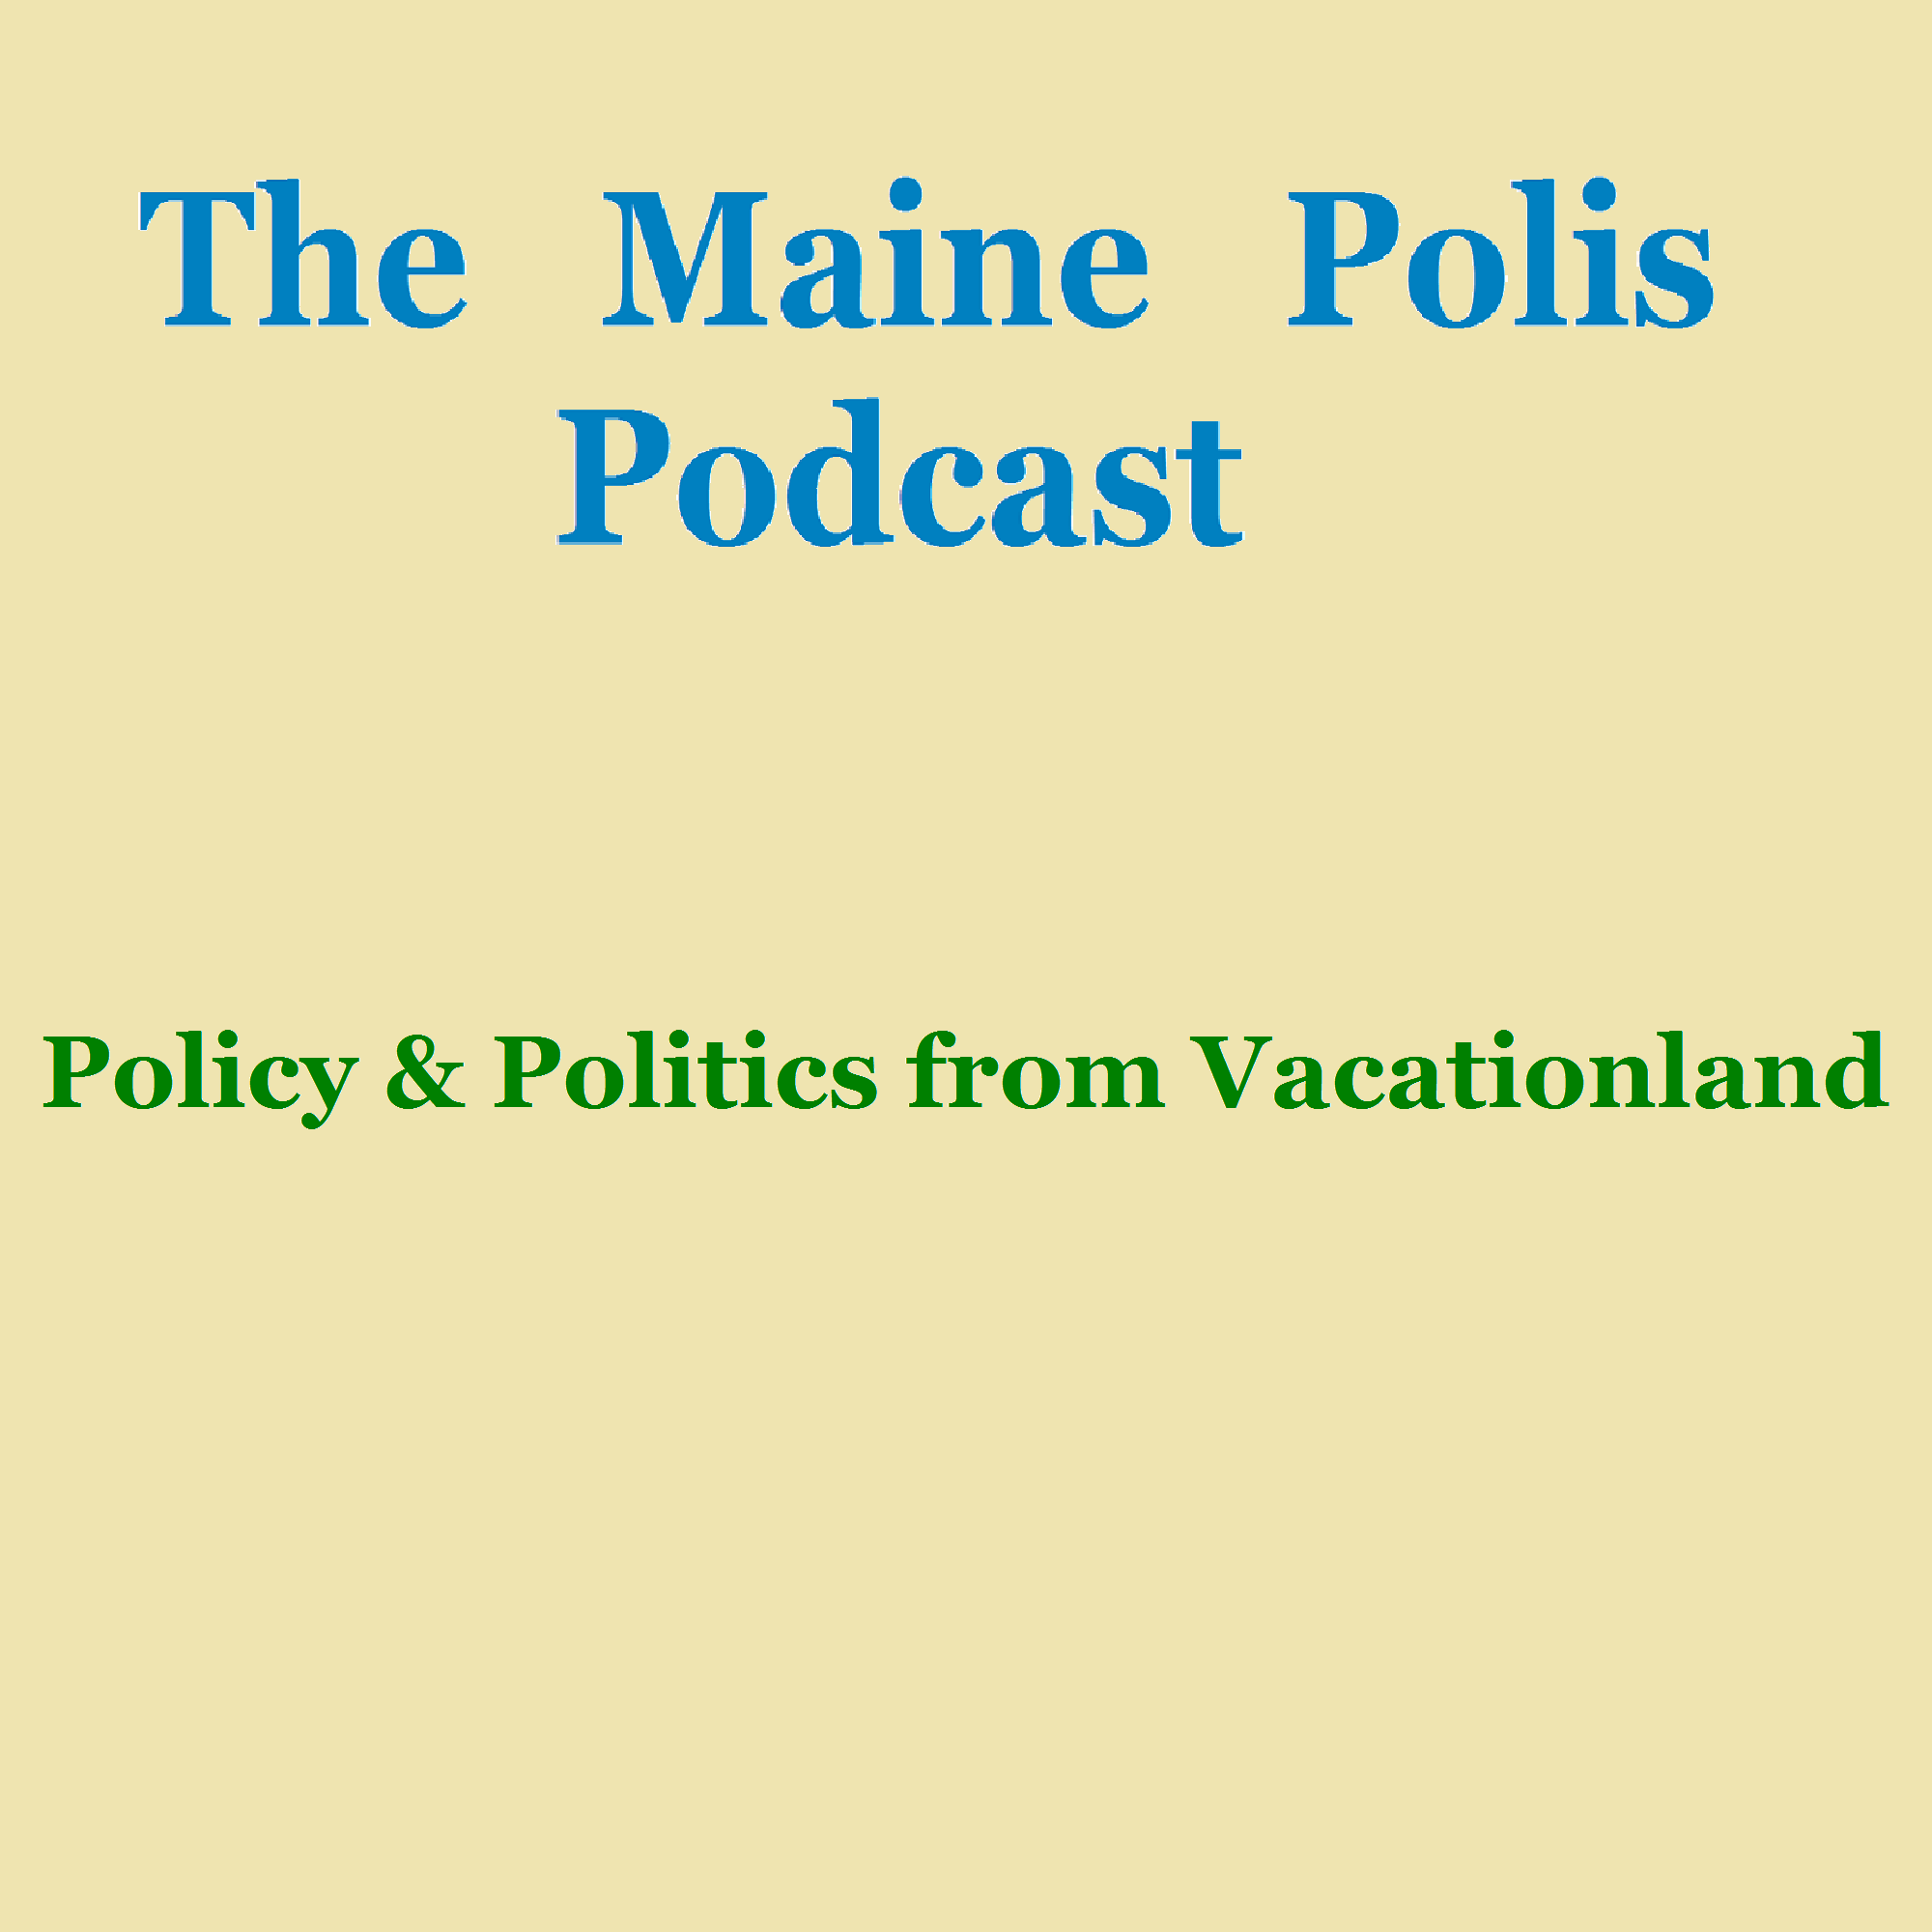 TMP Podcast #2 - Maine's November 3rd Election Results Shakedown